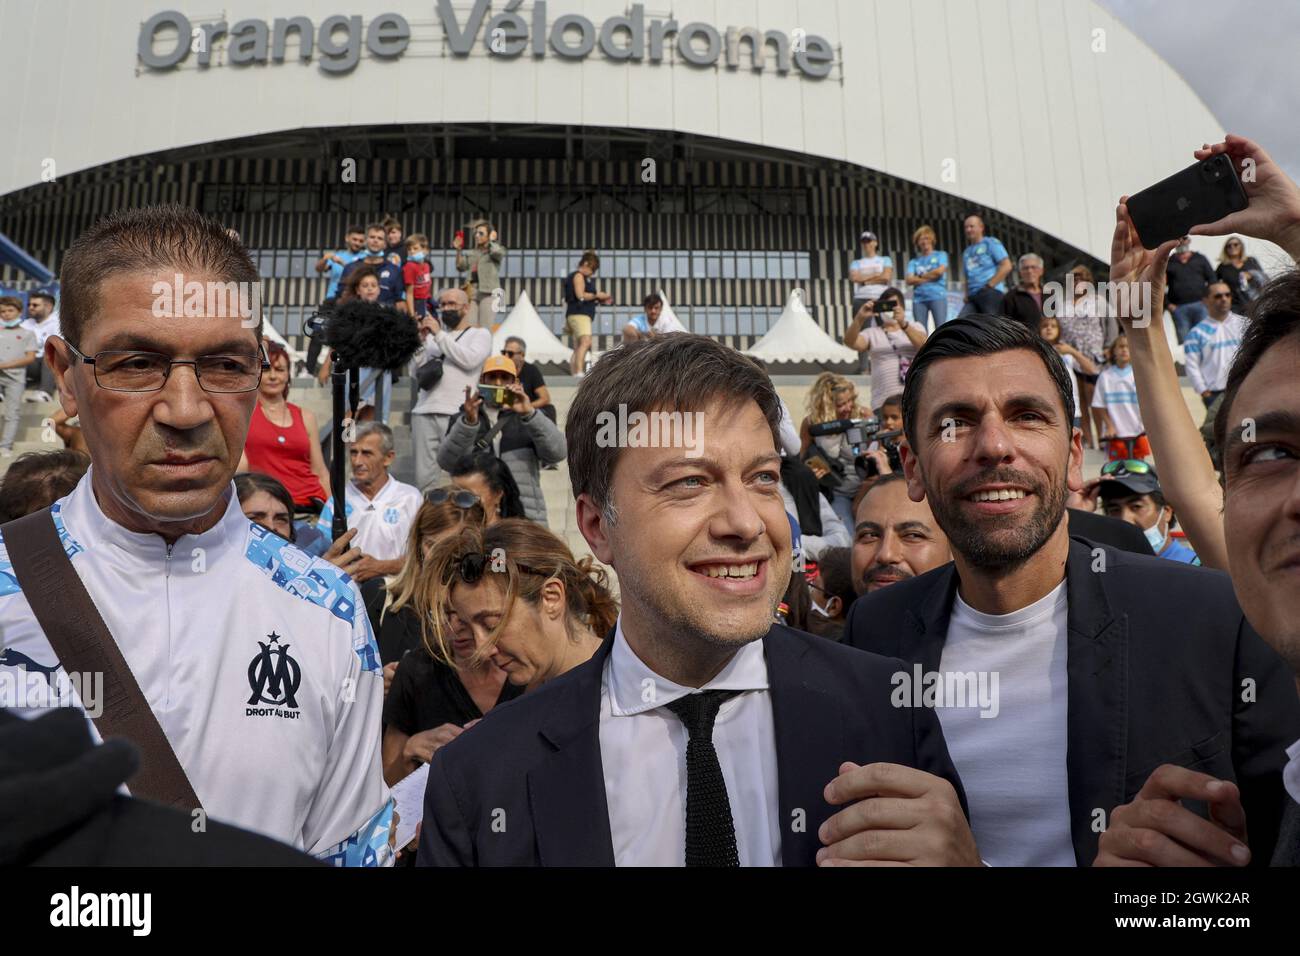 Benoît Payan, mayor of Marseille, during the tribute to Bernard Tapie,  former president of Olympique de Marseille, in front of the Orange  Velodrome, in Marseille, France, on October 03, 2021. Photo by